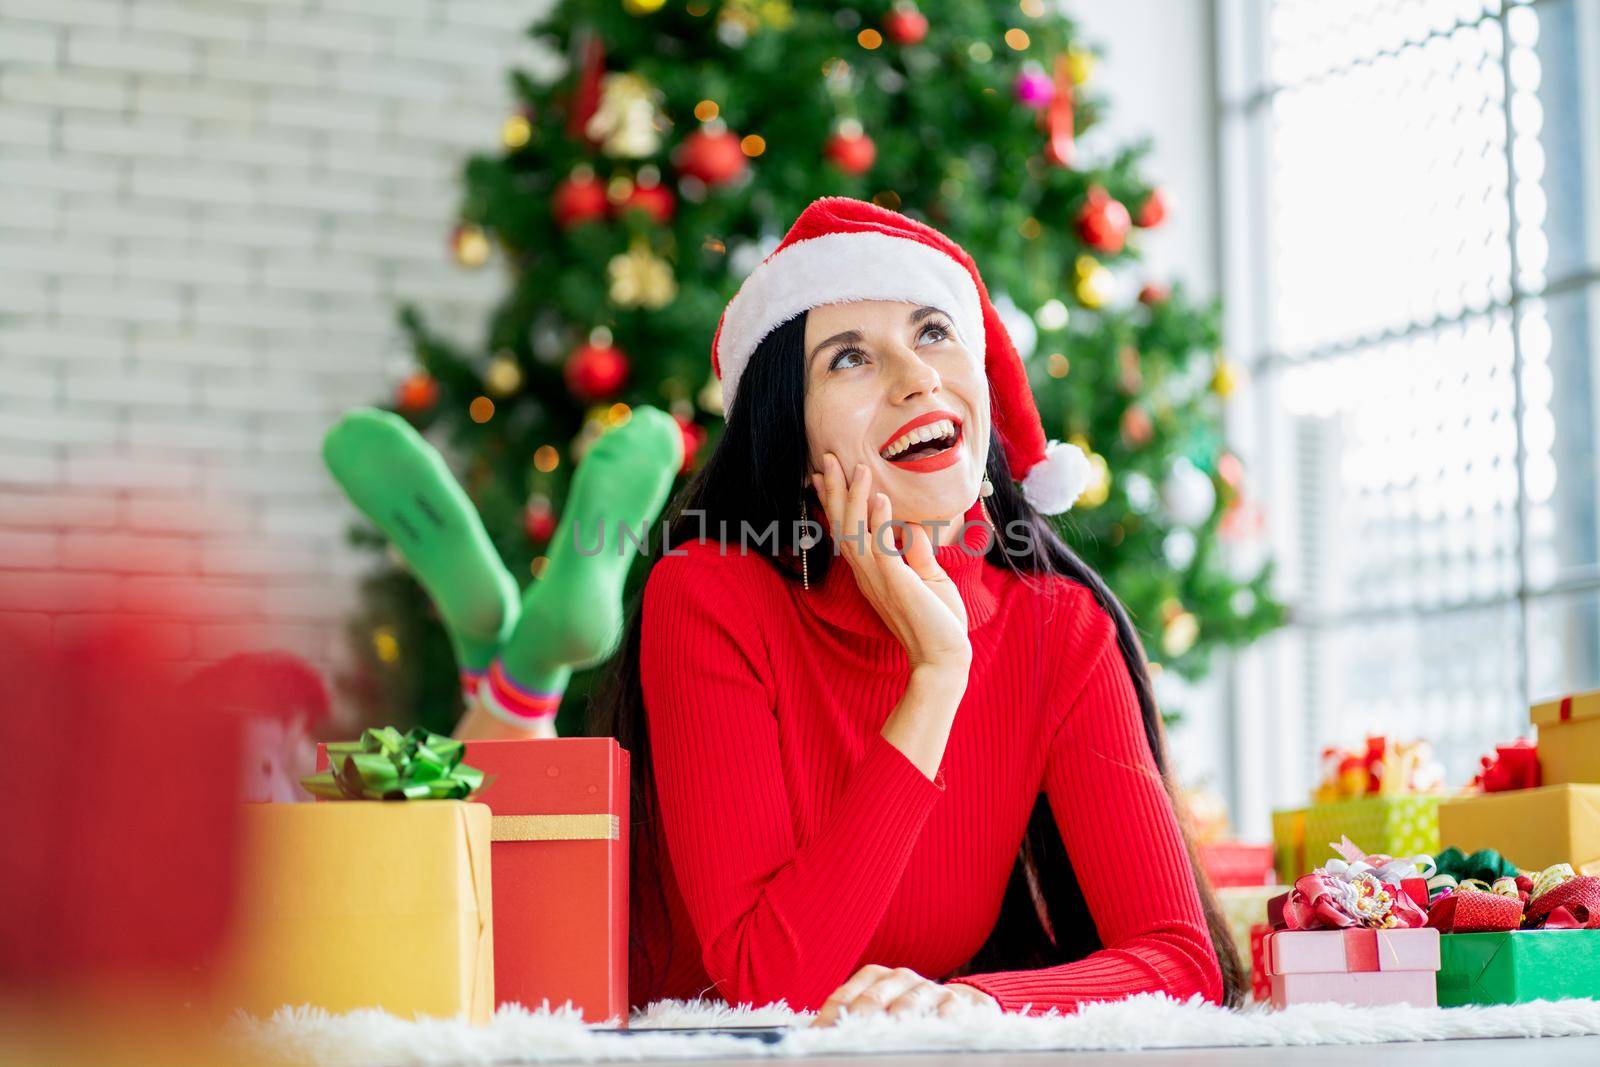 Pretty woman with Christmas costume lie on floor and look up on right side with smiling like exciting with the present and Christmas tree as background.